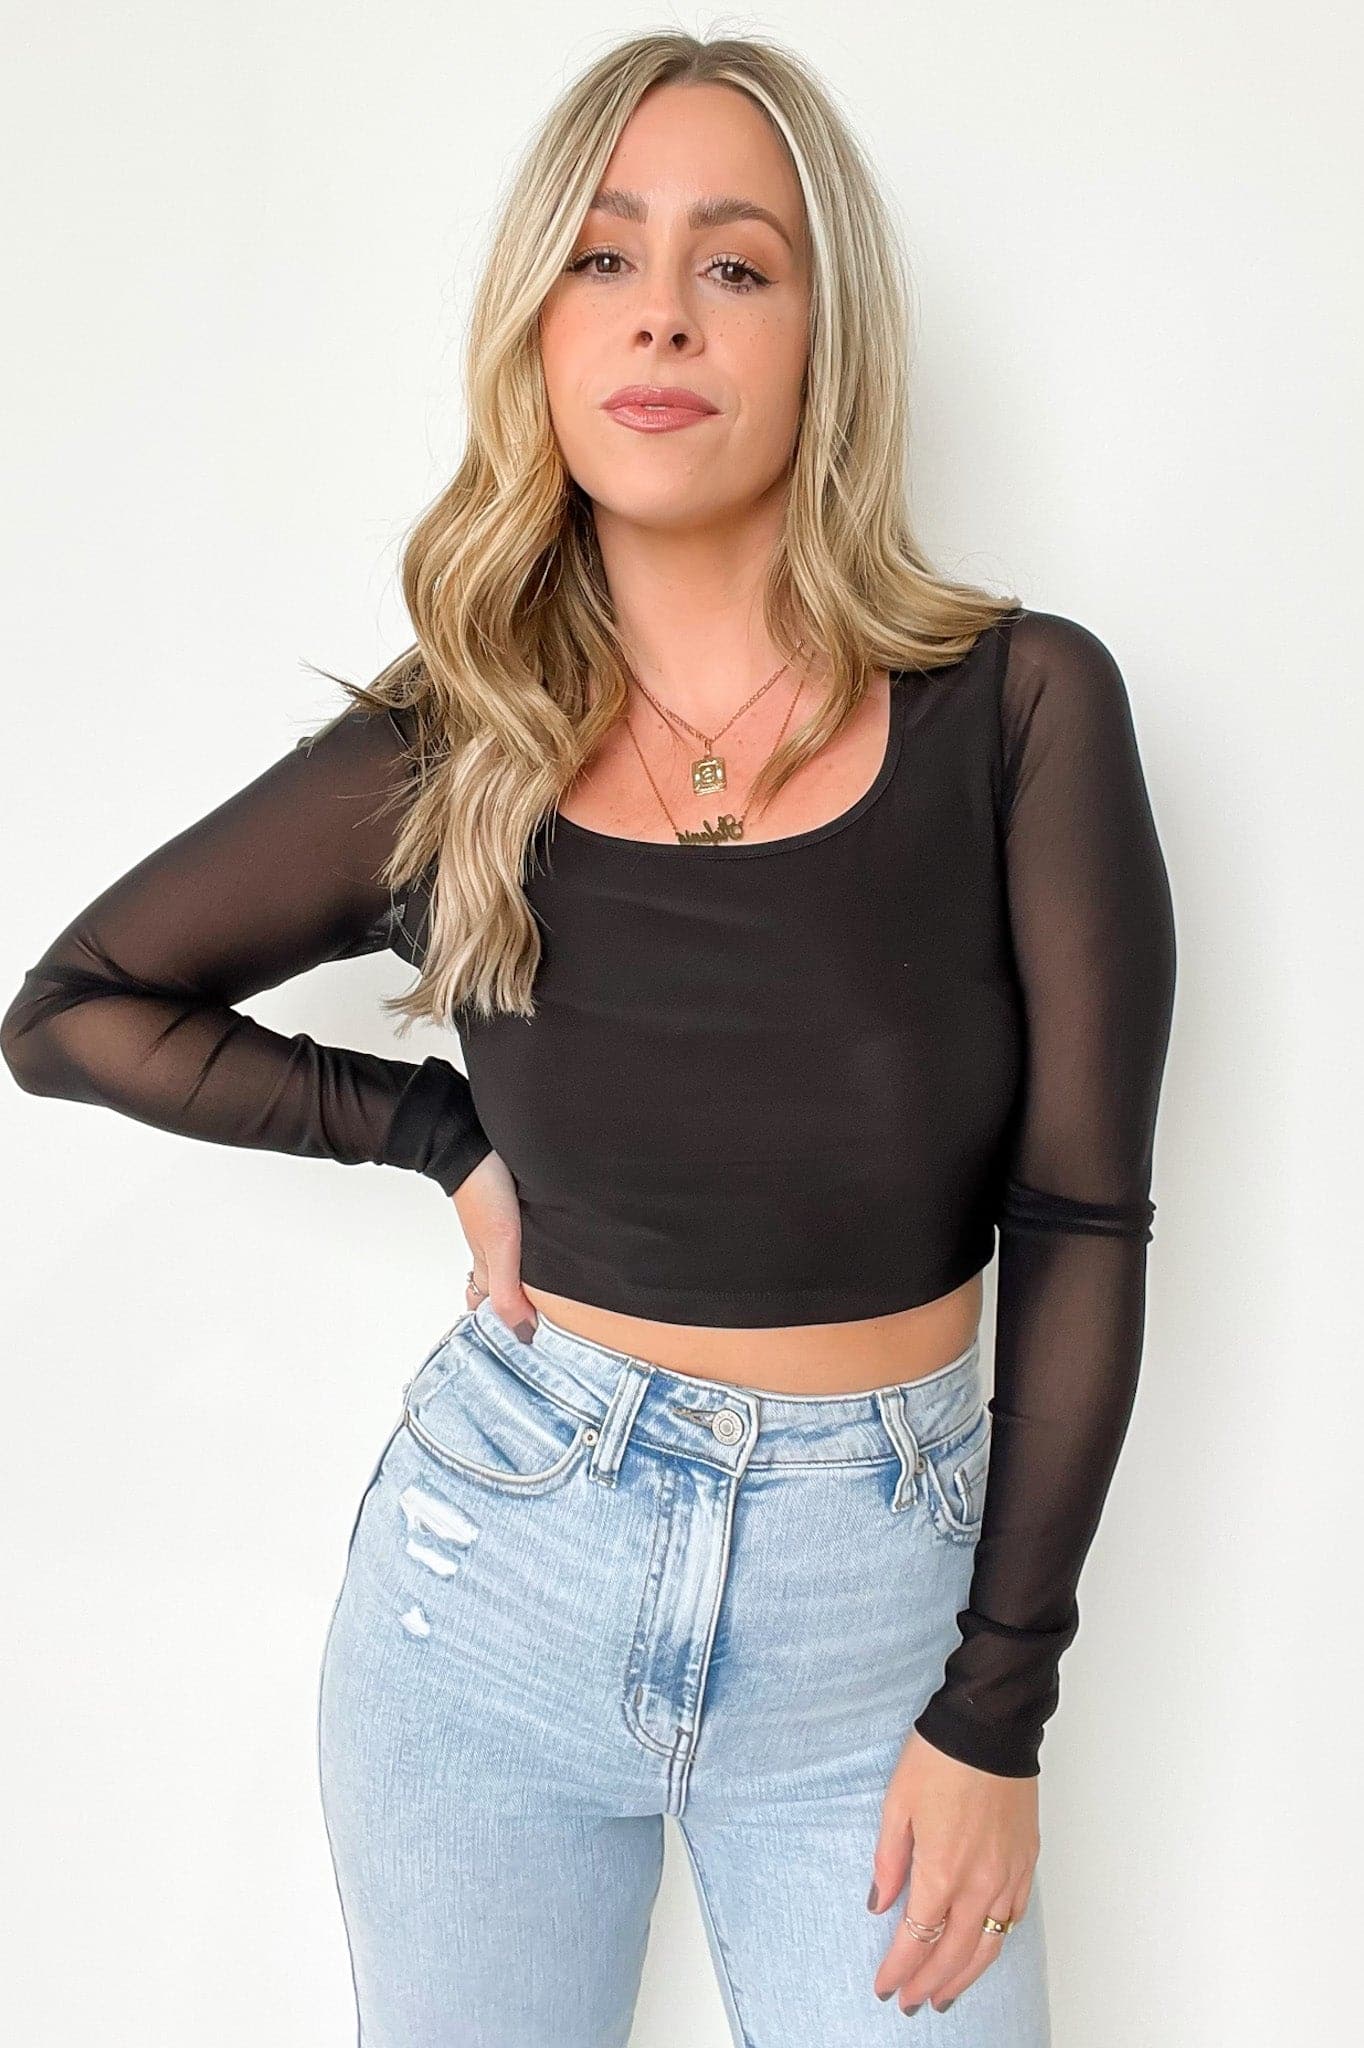  Evenings in Love Mesh Sleeve Cropped Top - FINAL SALE - Madison and Mallory